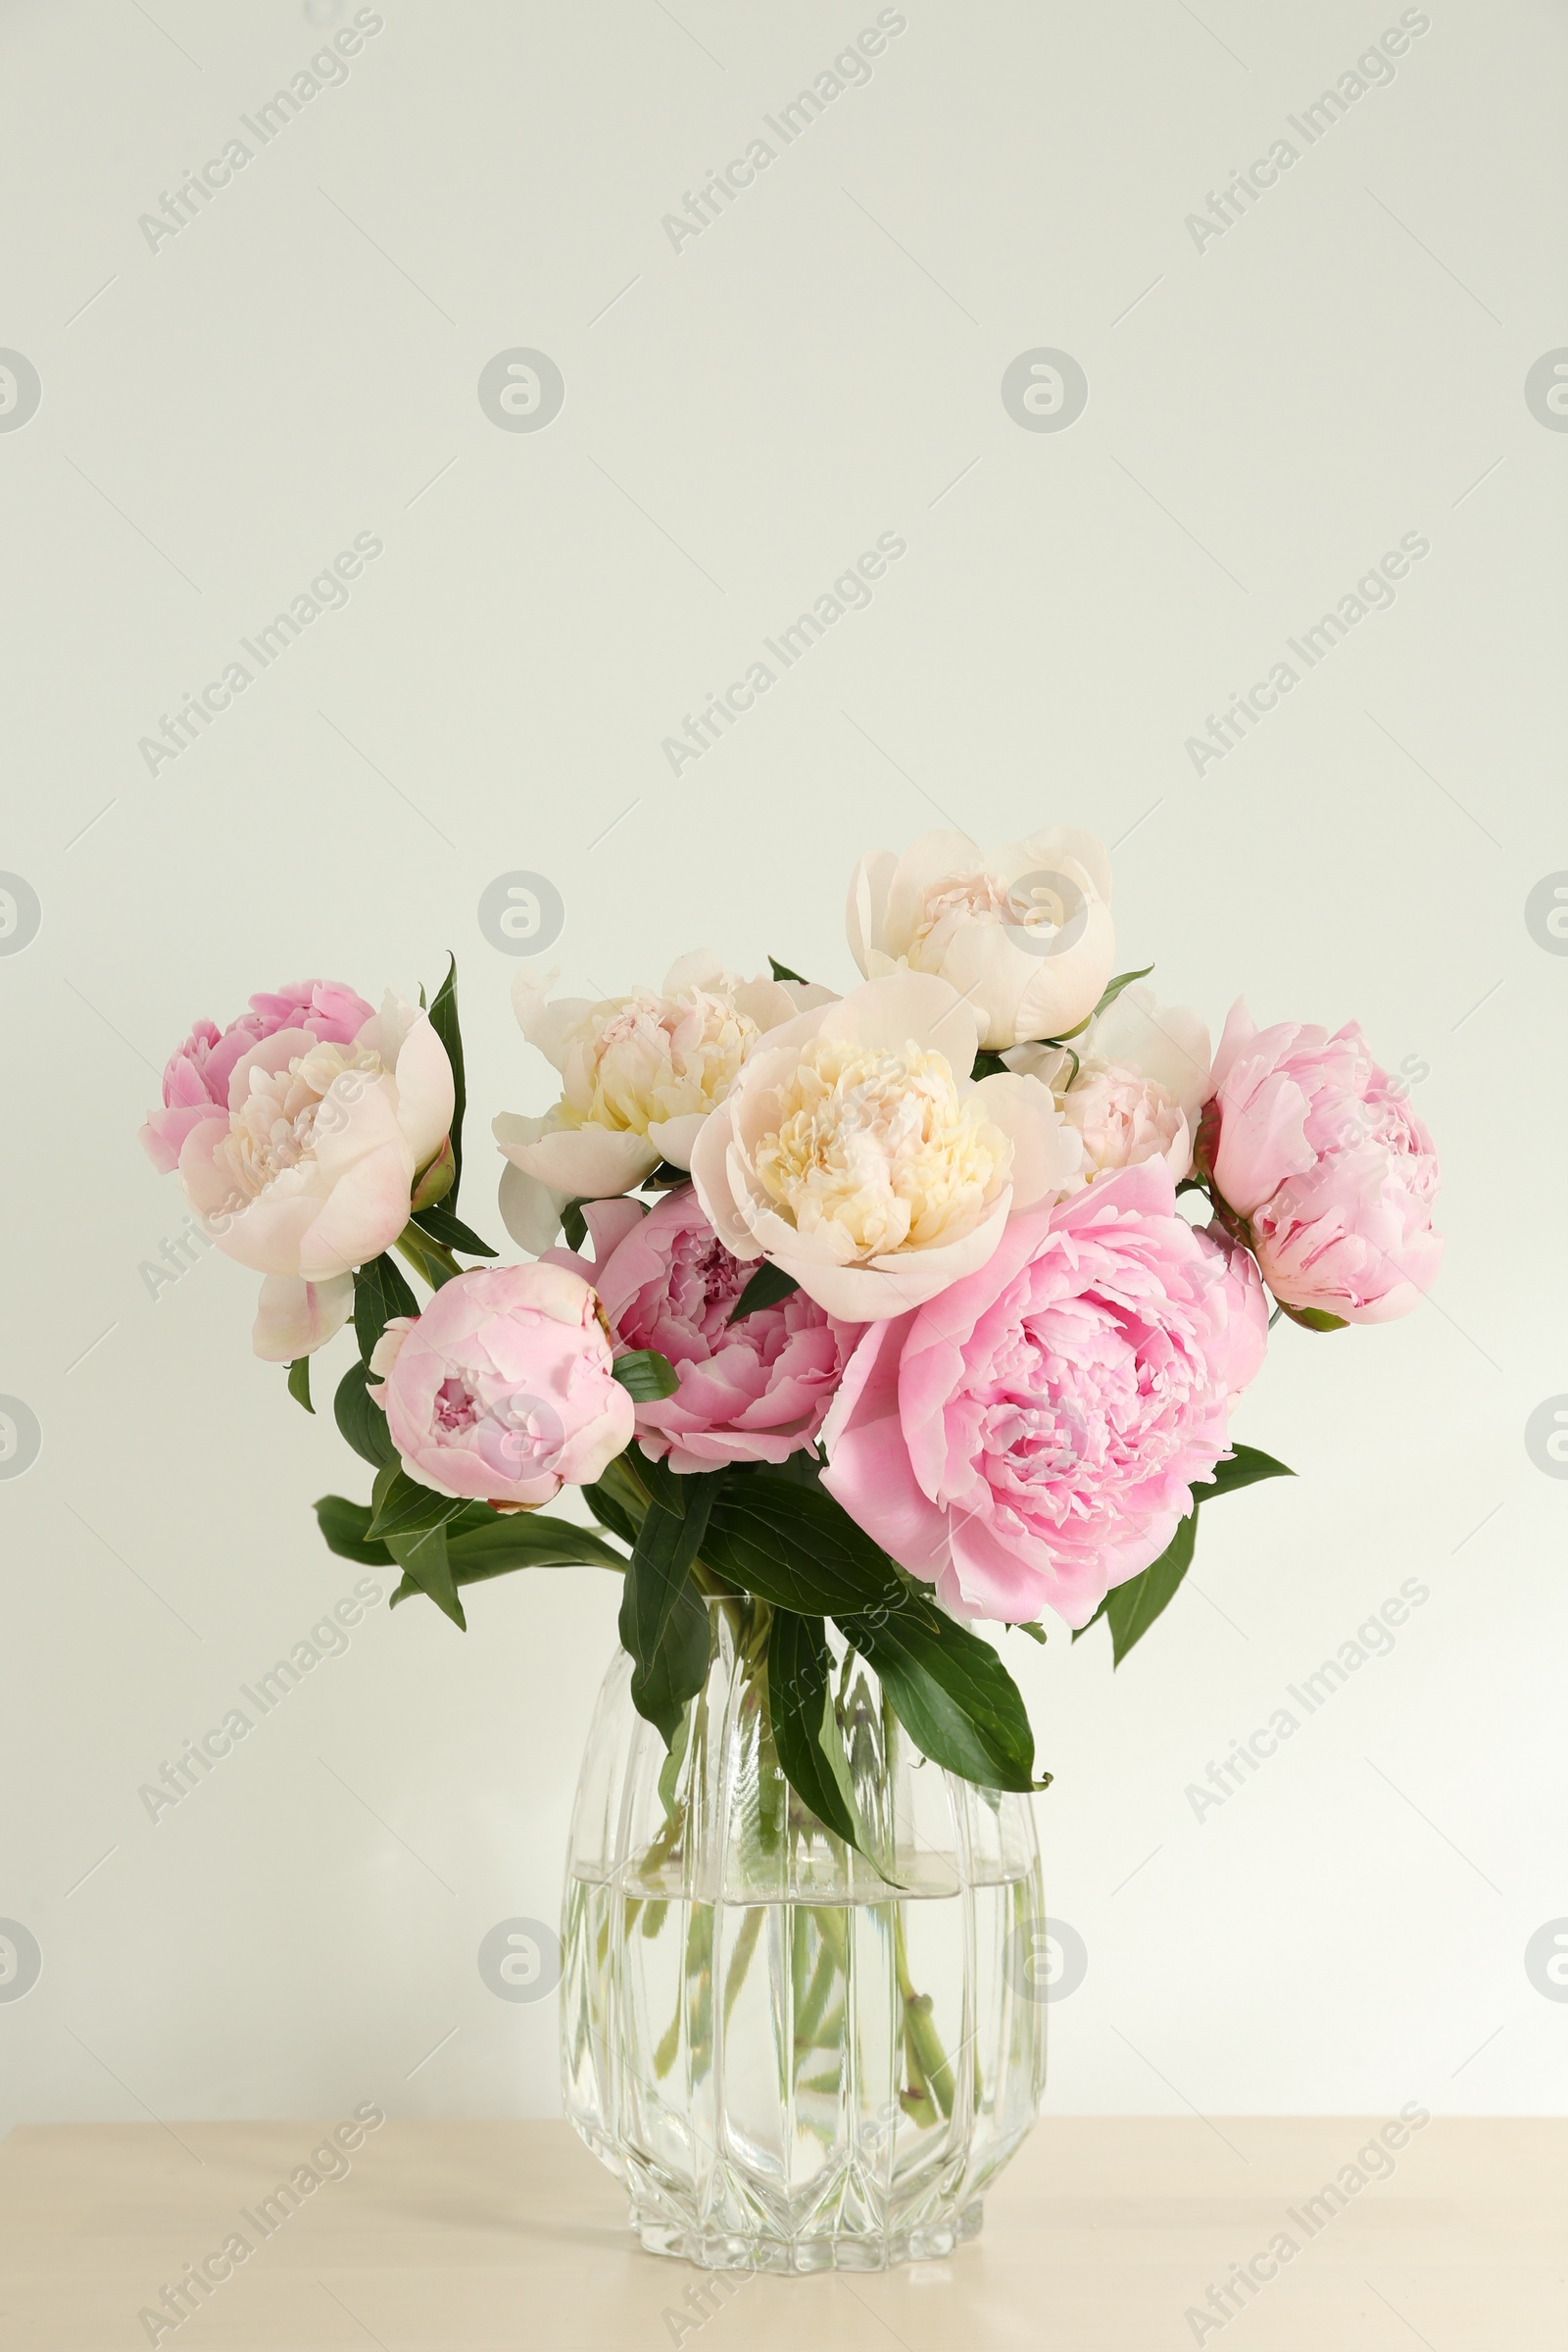 Photo of Bouquet of beautiful peonies in glass vase on beige table